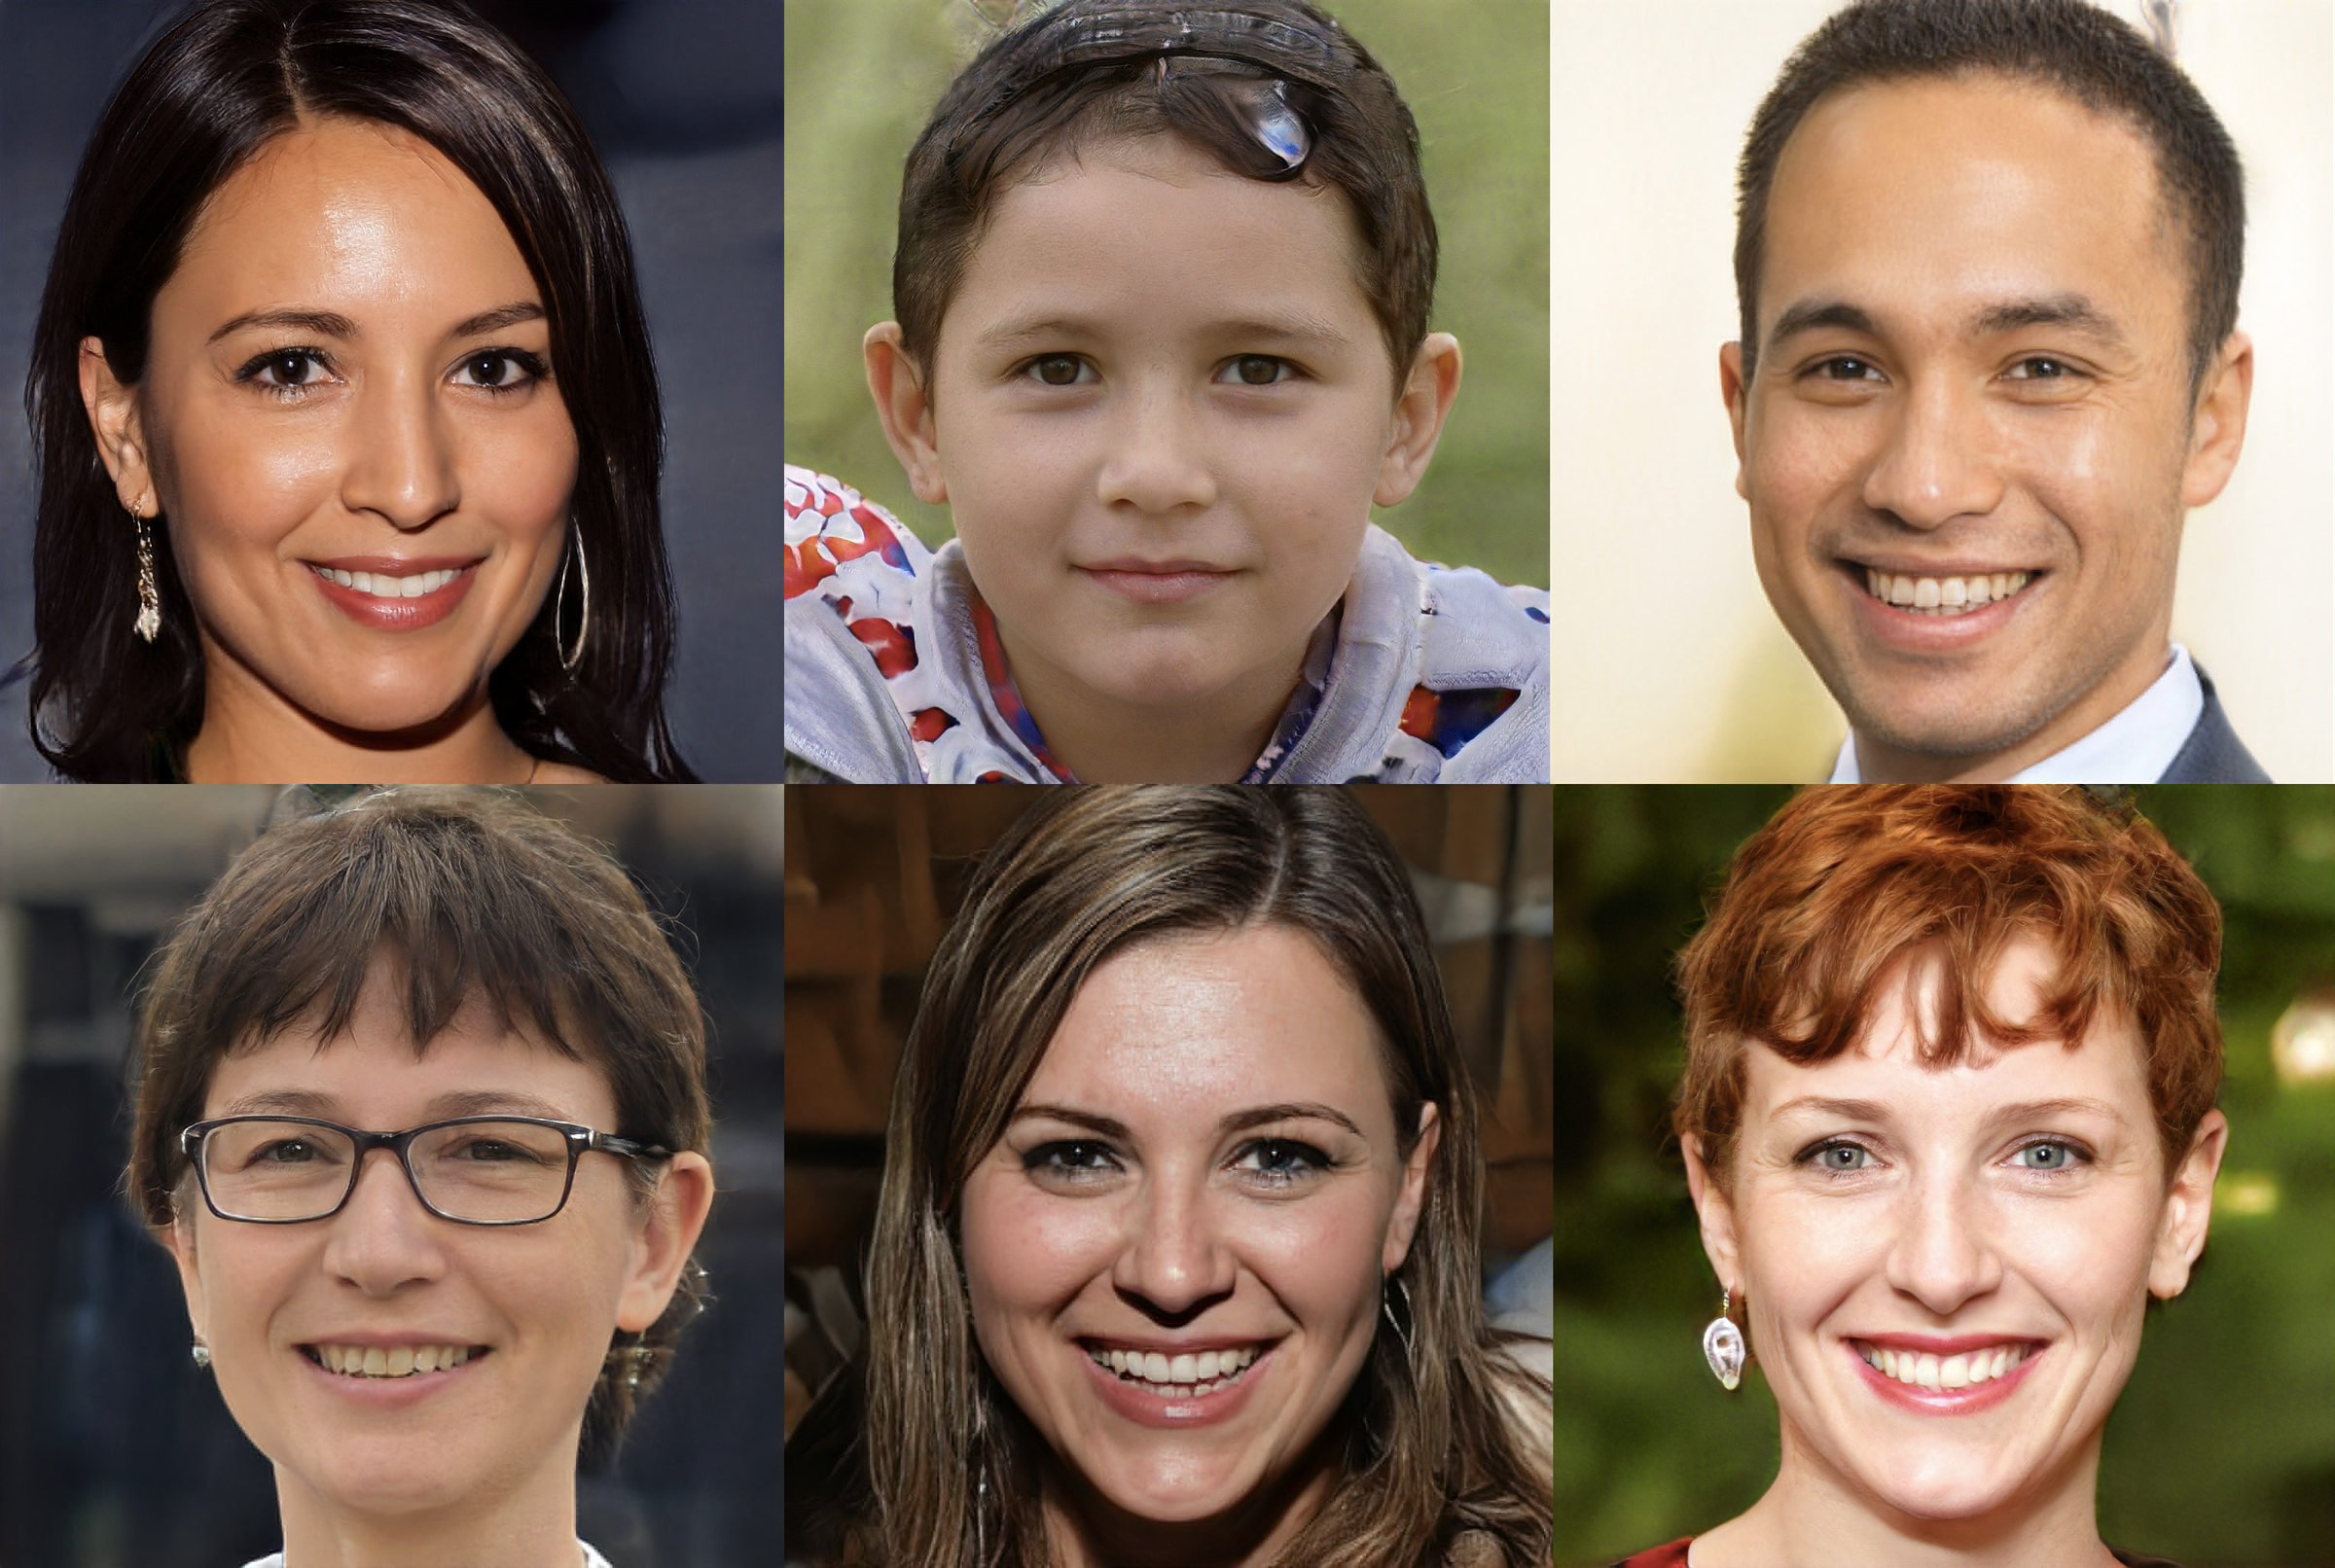 Examples of deepfakes include these fake faces, generated by a well-known AI model called StyleGAN.